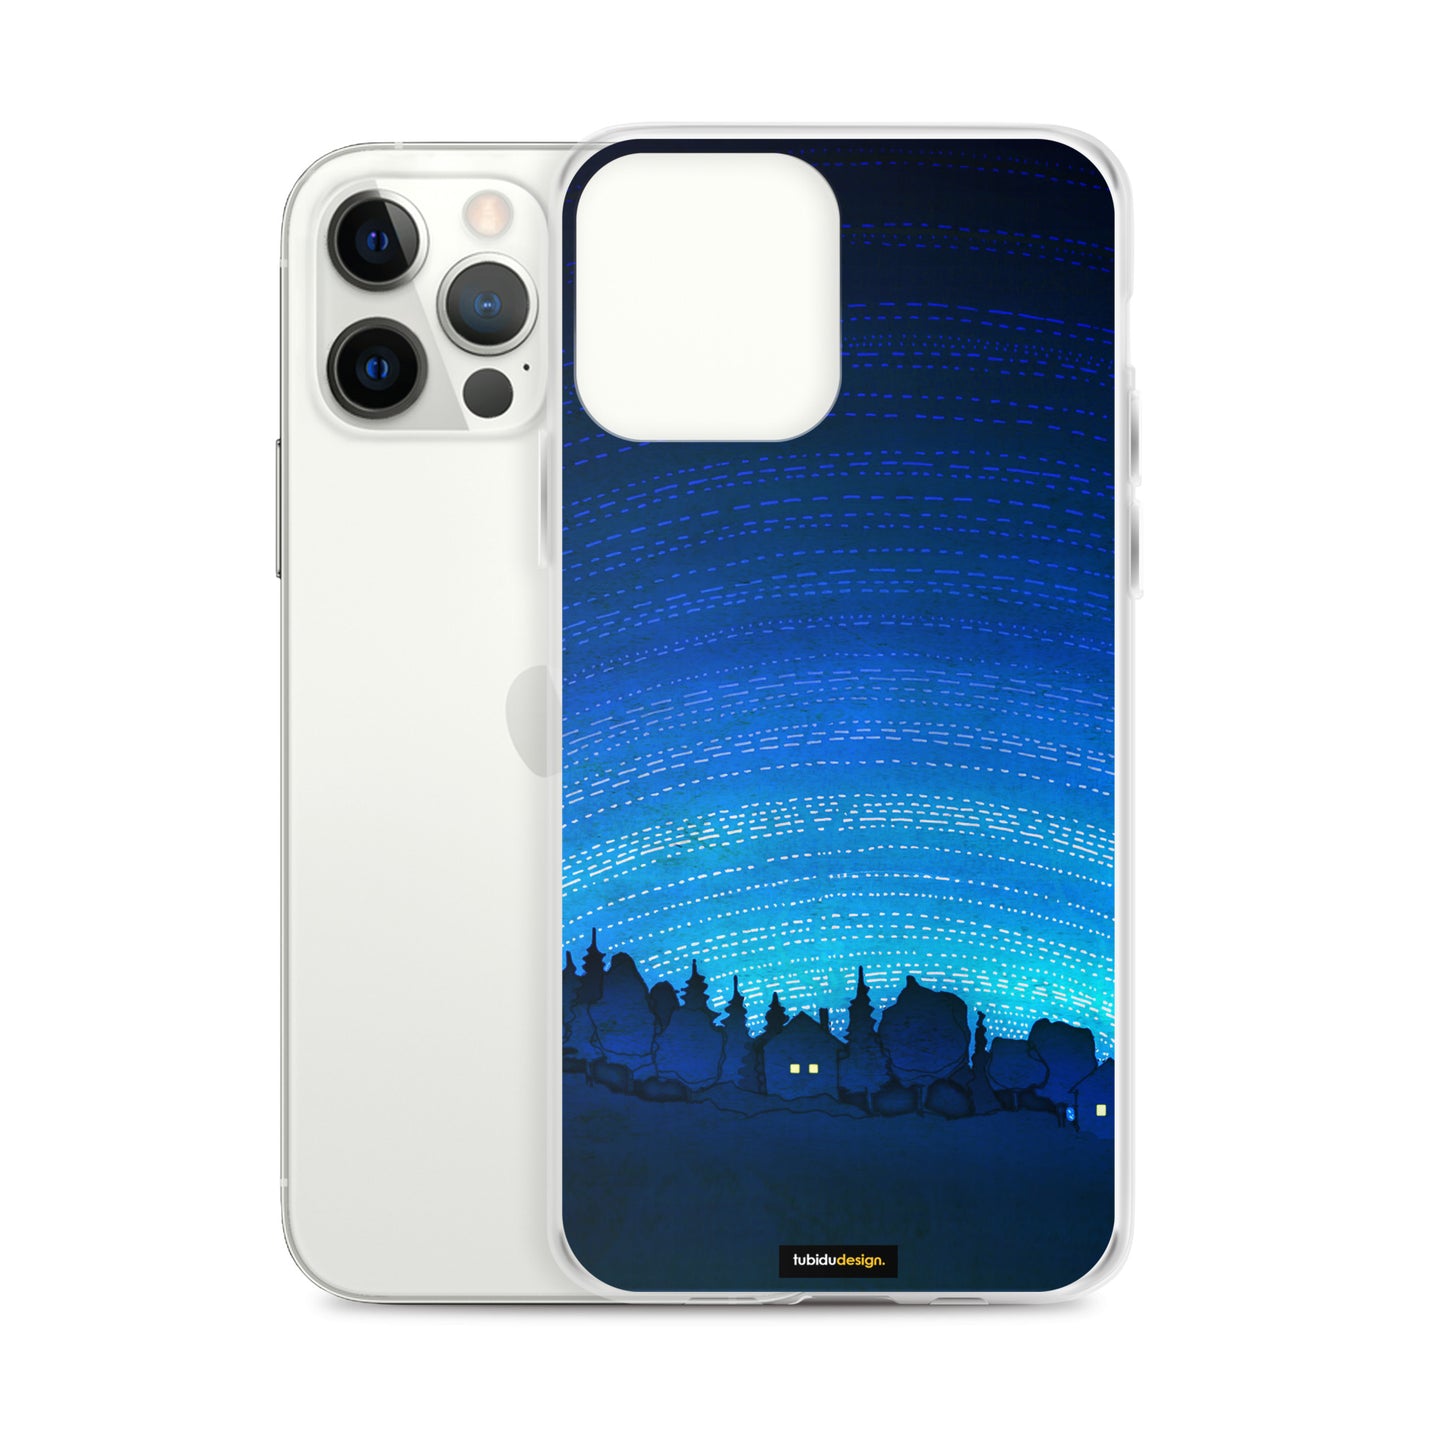 Earth calling - Illustrated iPhone Case